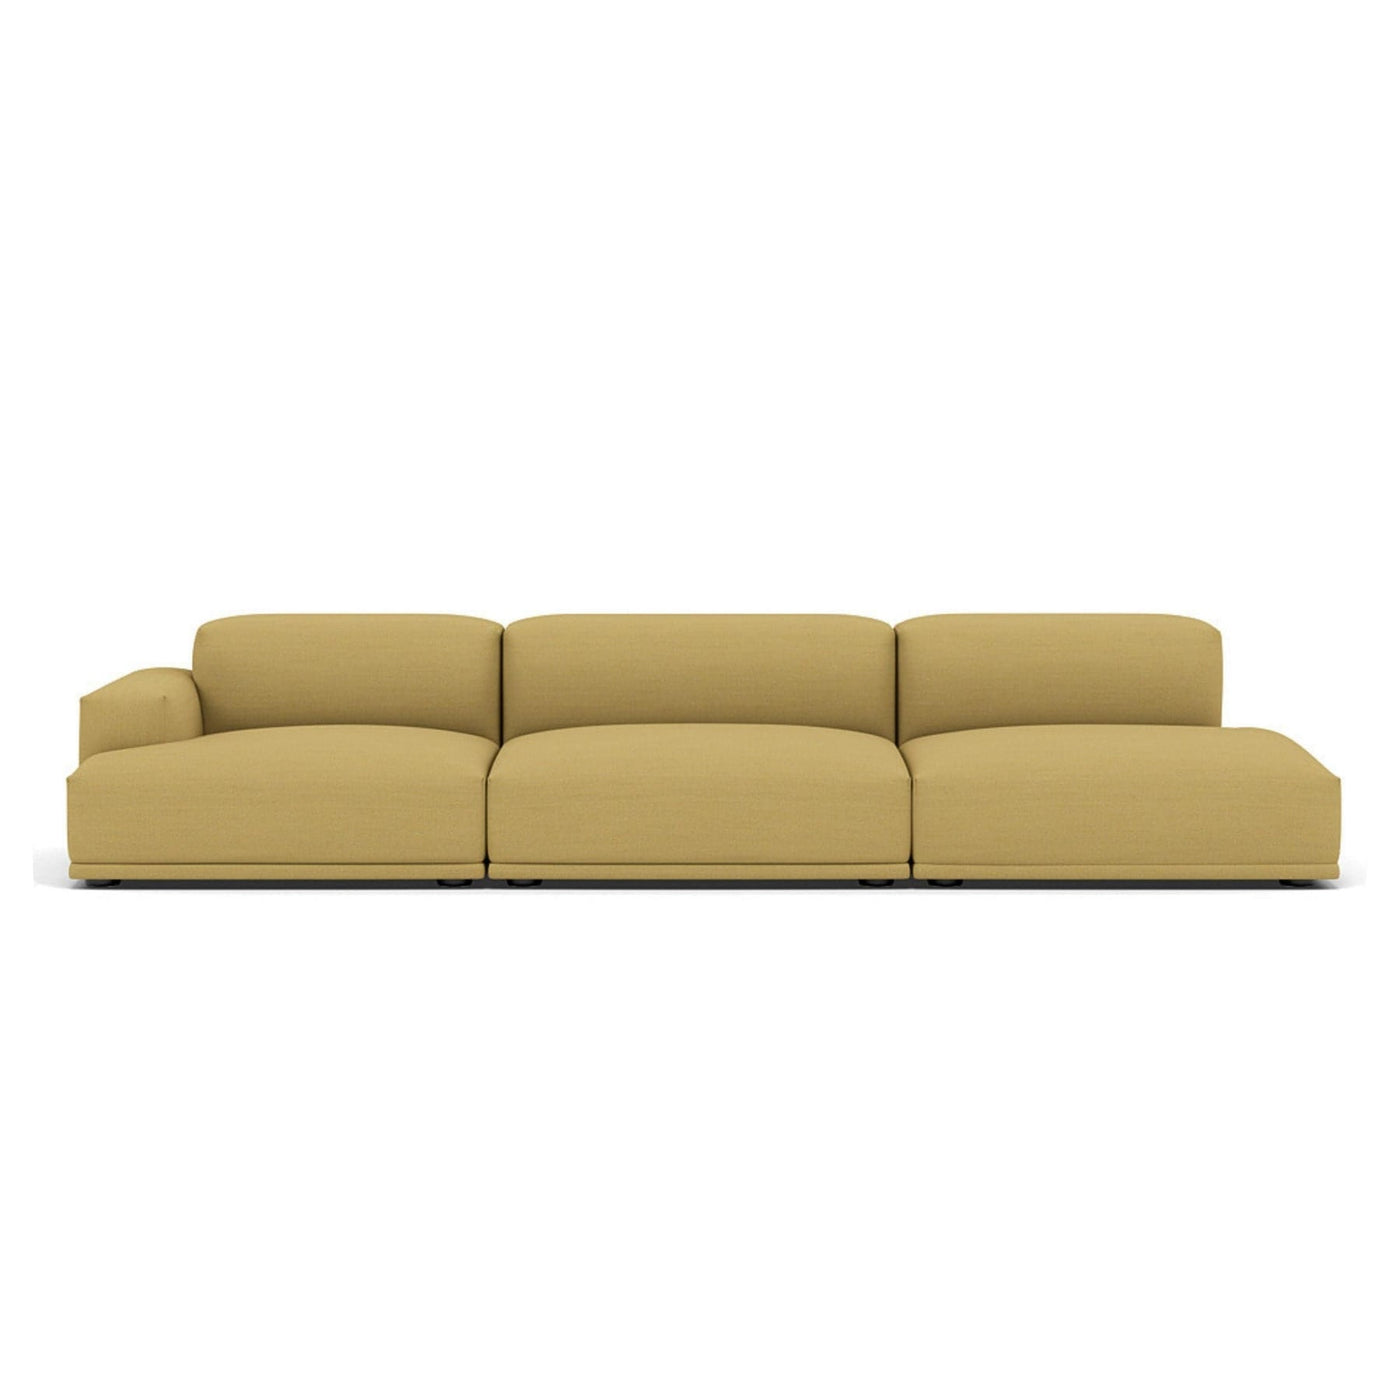 Muuto Connect modular sofa 3 seater in yellow fabric configuration 2. Made to order from someday designs. #colour_hallingdal-407